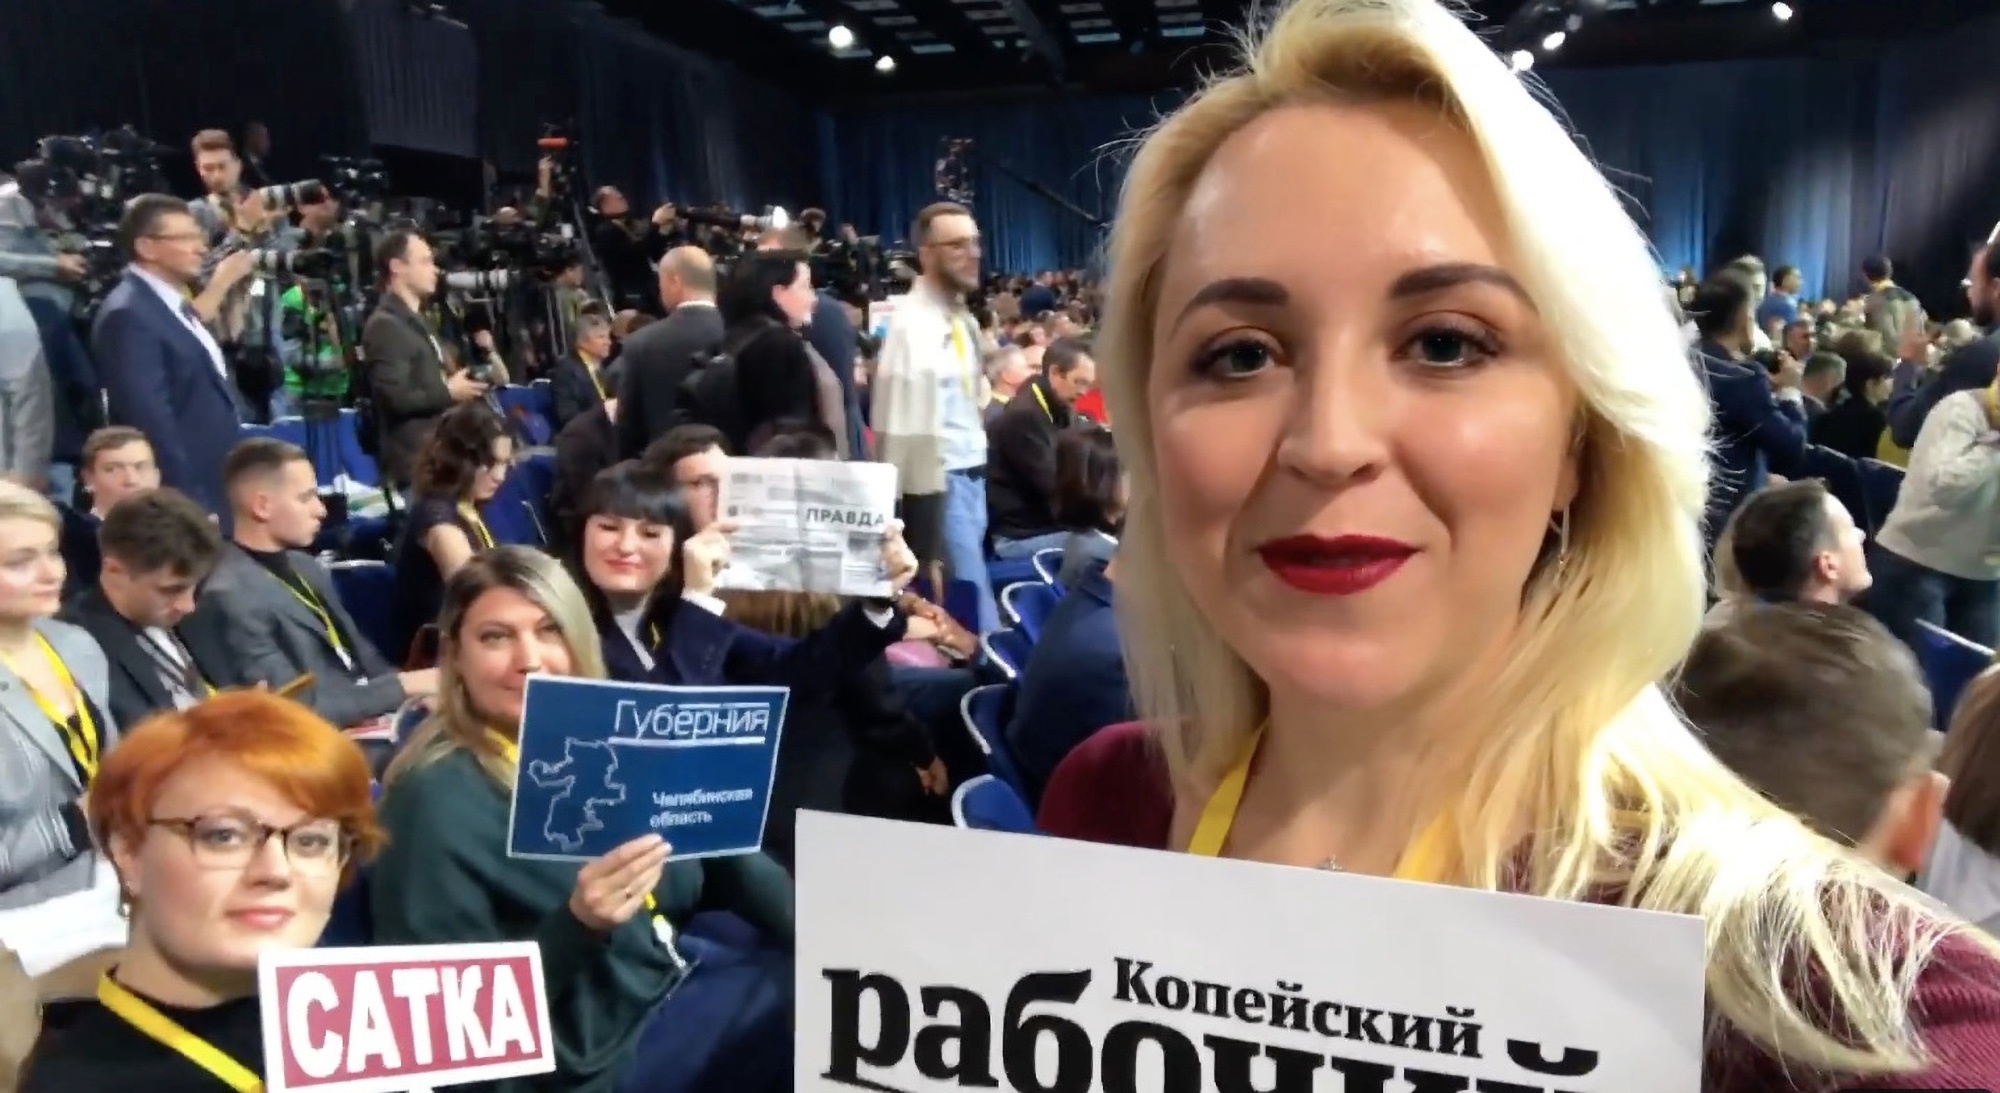 Read more about the article Newspaper Editor In Small Russian Town Who Scored Unlikely Exclusives With Hollywood Stars Dies At 35